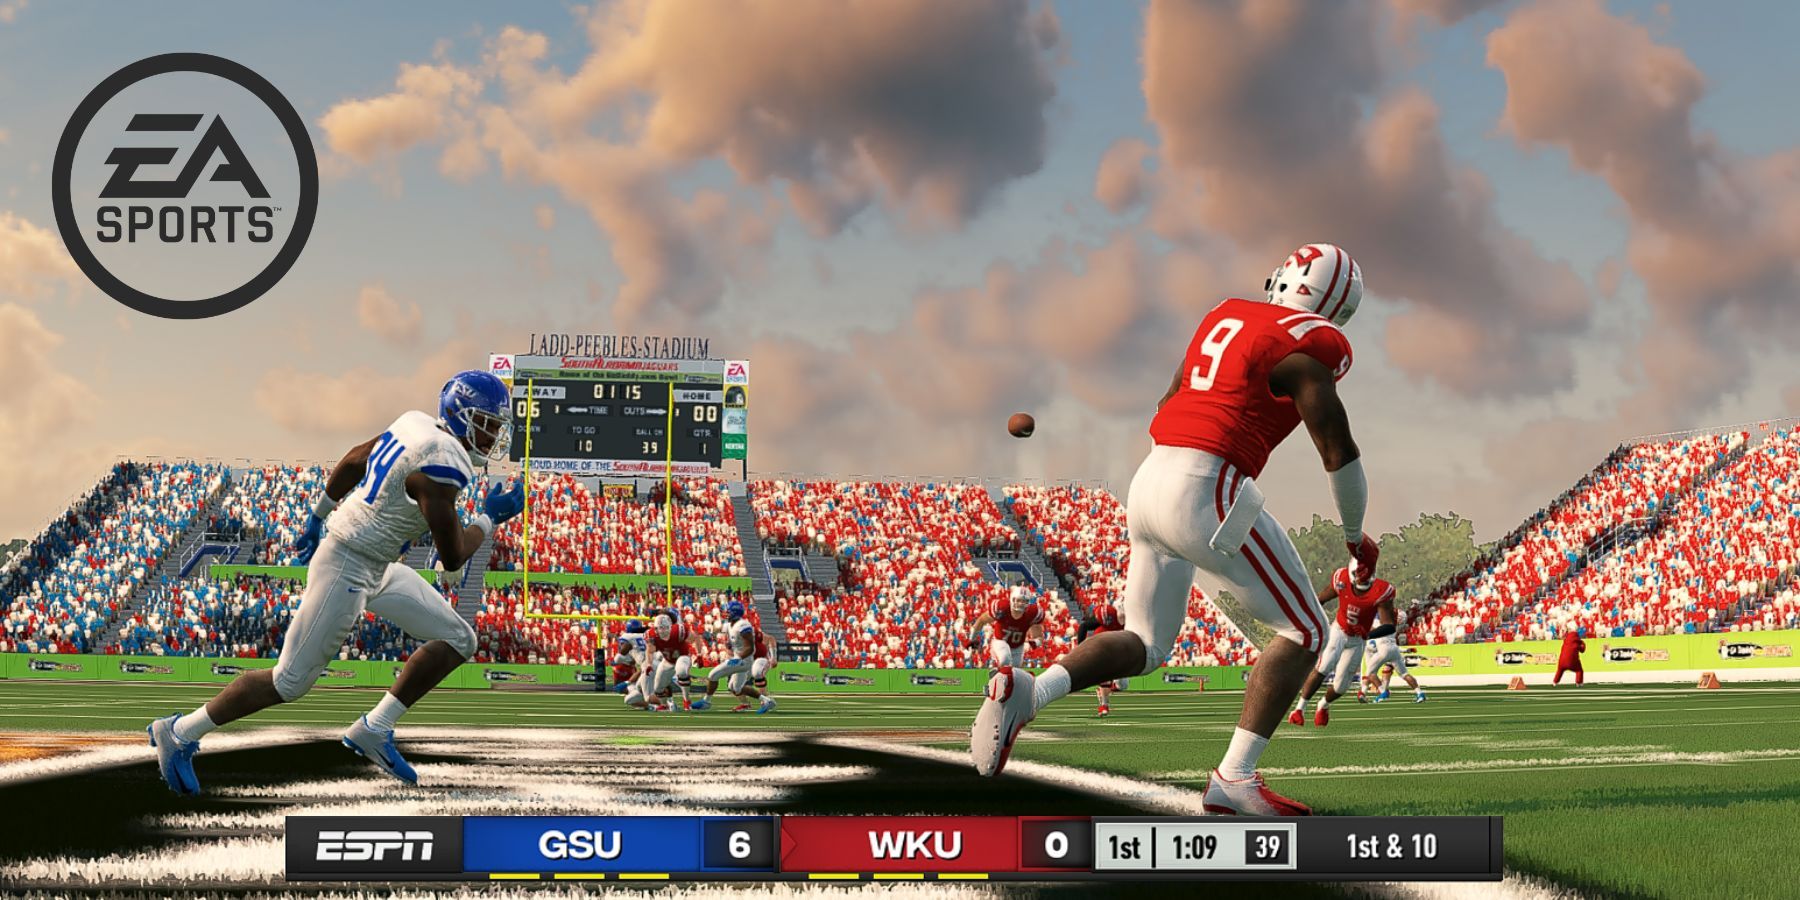 ea sports college football features